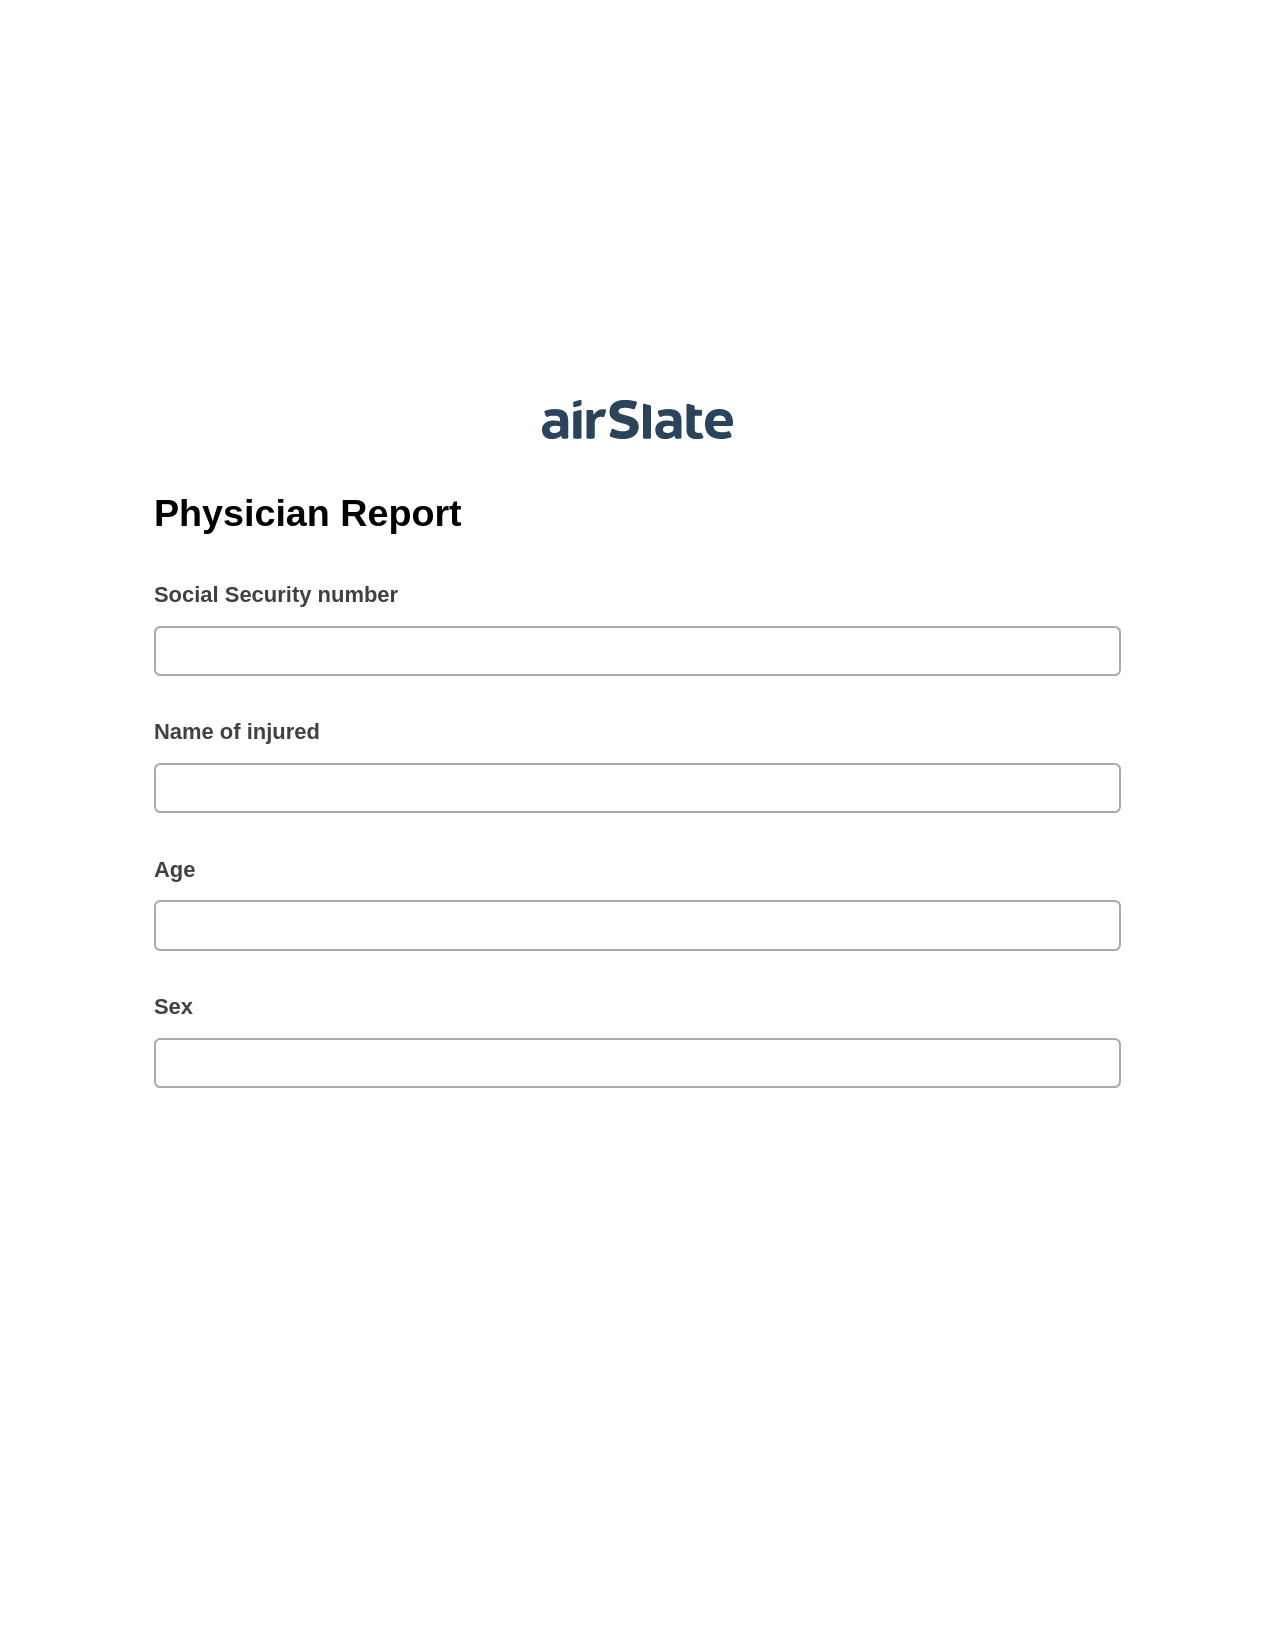 Physician Report Pre-fill Dropdowns from Airtable, Update NetSuite Record Bot, Archive to Dropbox Bot